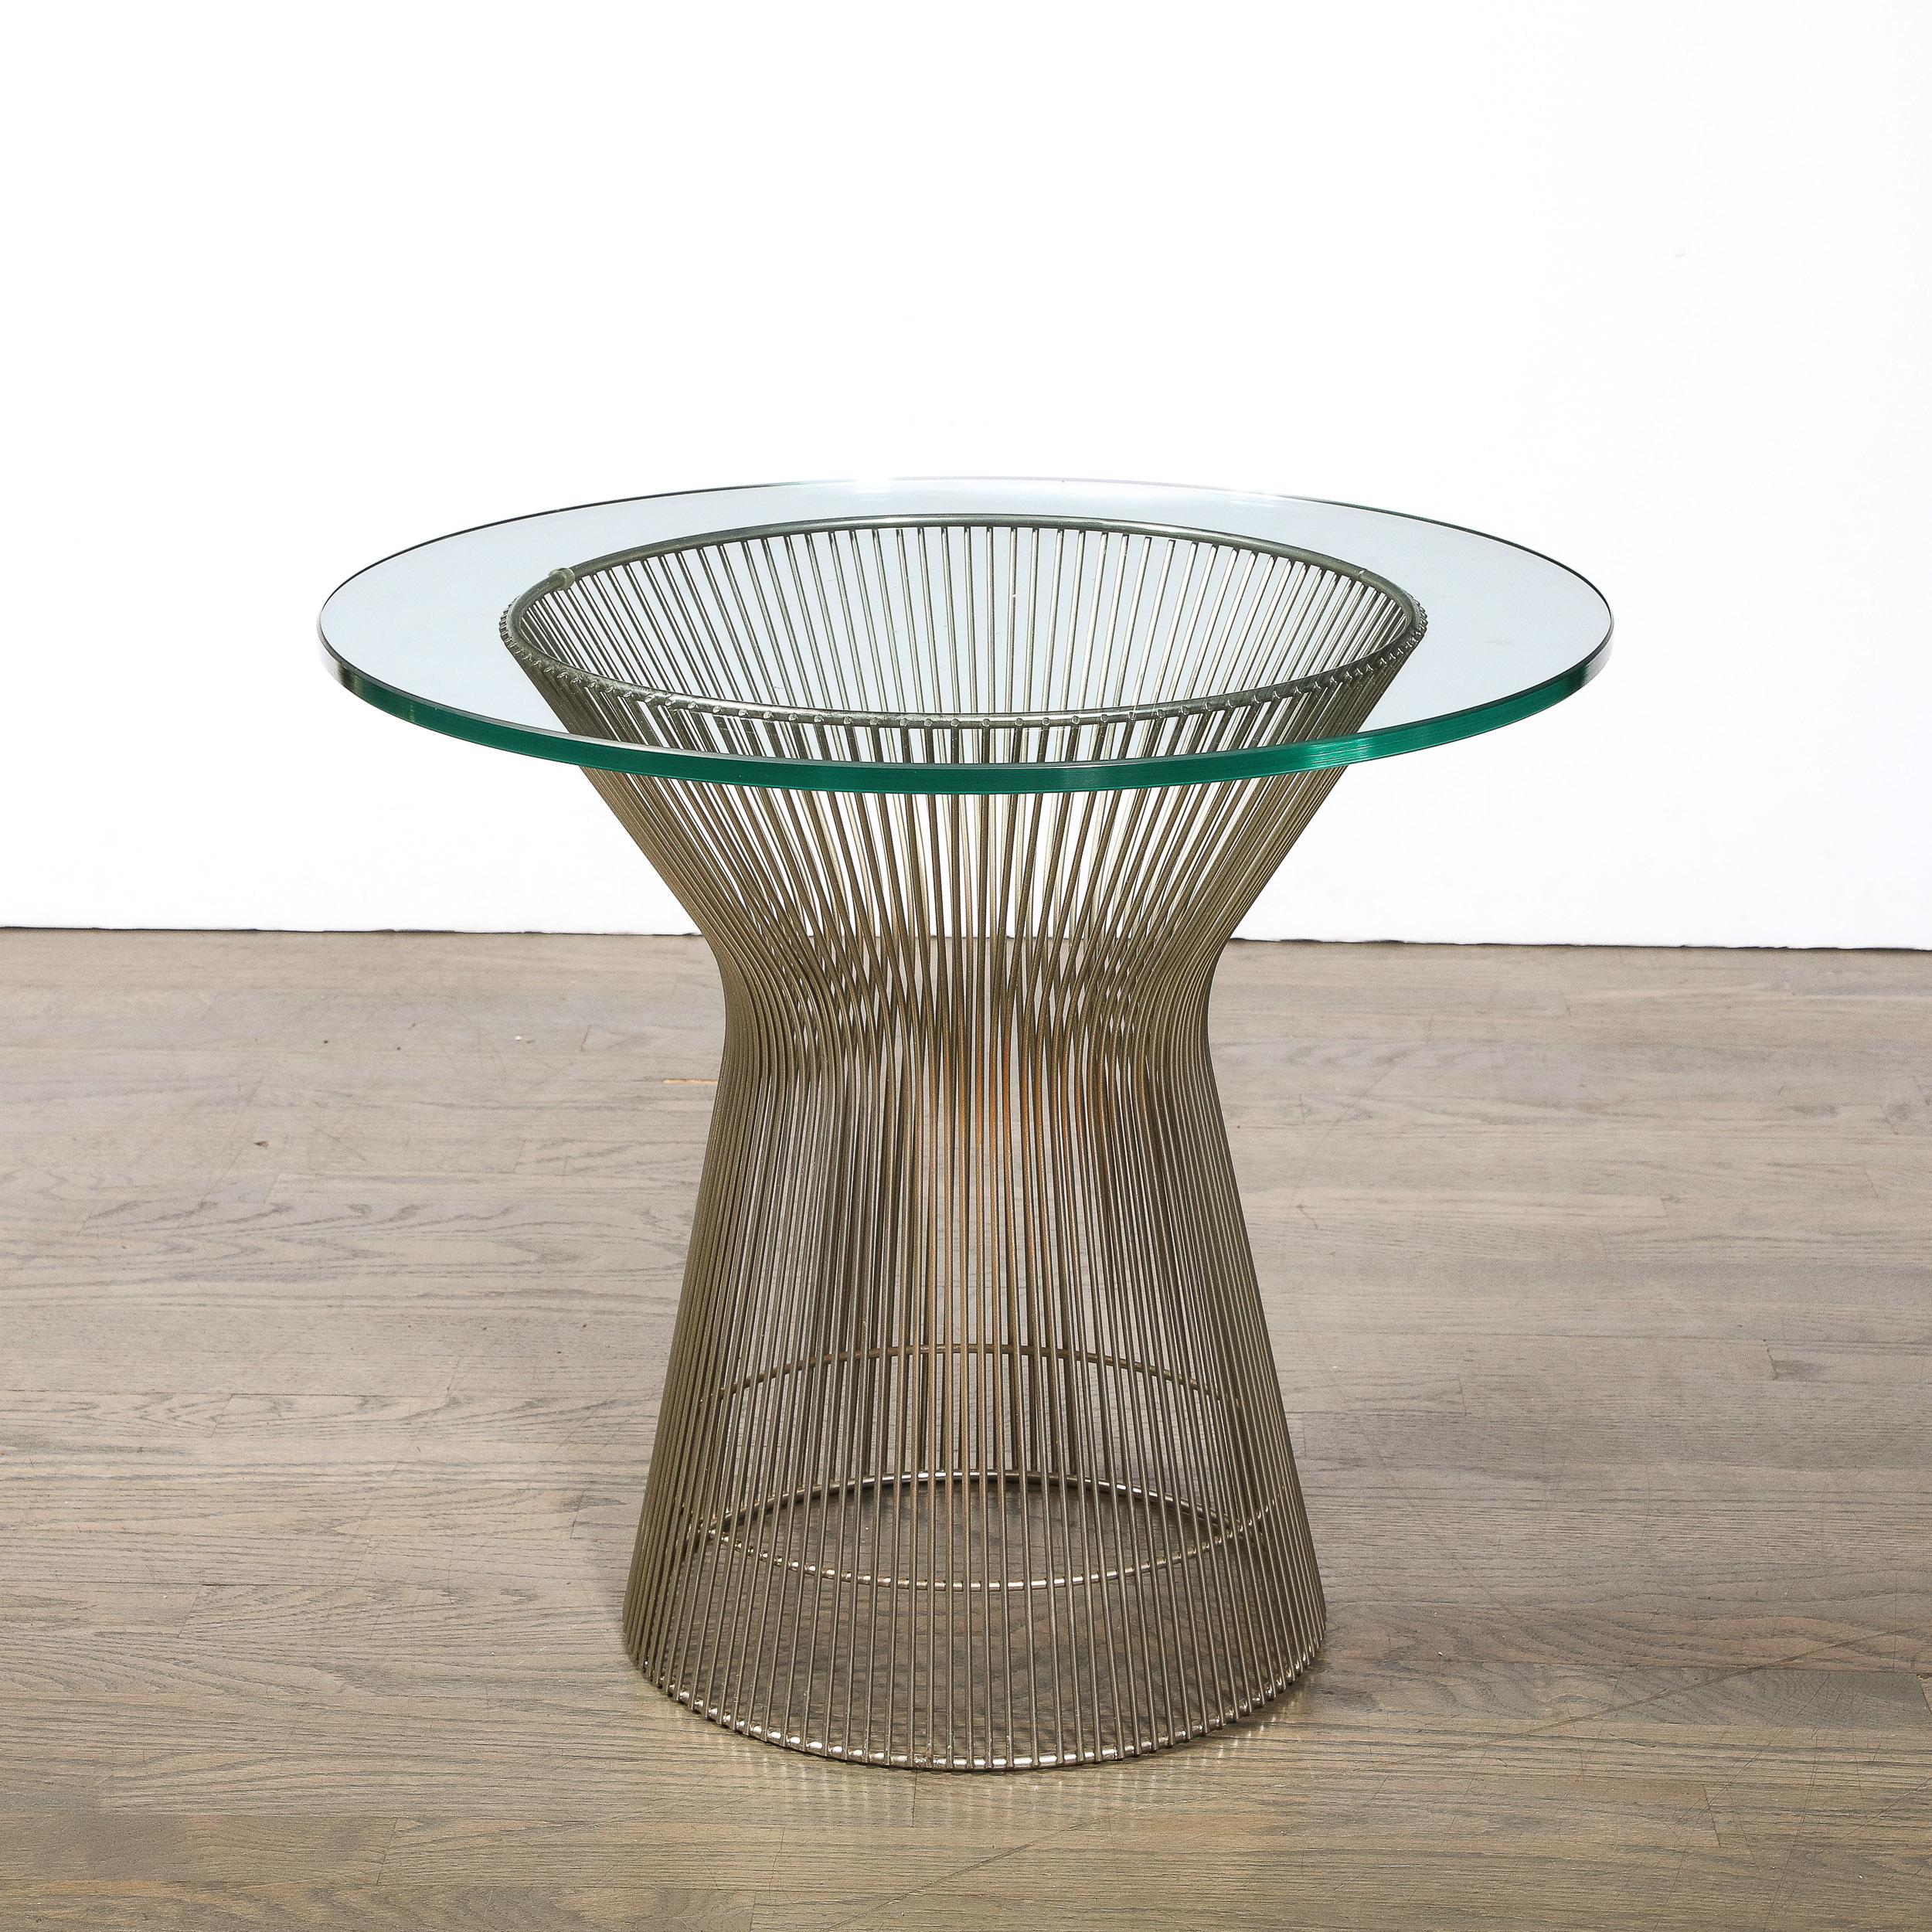 This Bent and Polished Nickel side Table designed by Warren Platner originates from the United States, Circa 1970. Featuring an hourglass form in a series of parallel nickel cylinders, the geometric minimalist construction is characteristic of